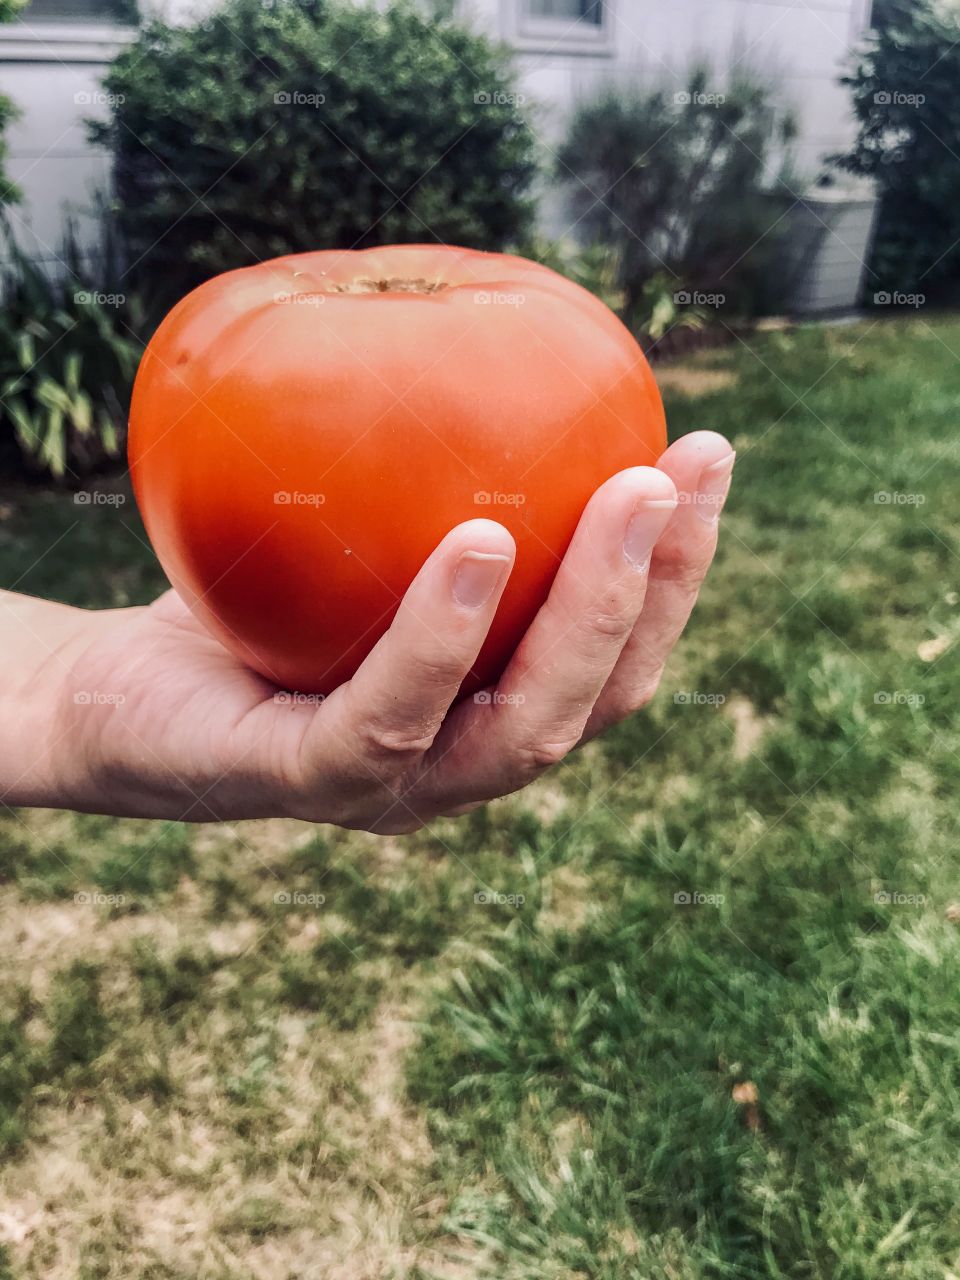 One huge, juicy, mouthwatering, Jersey tomato. 